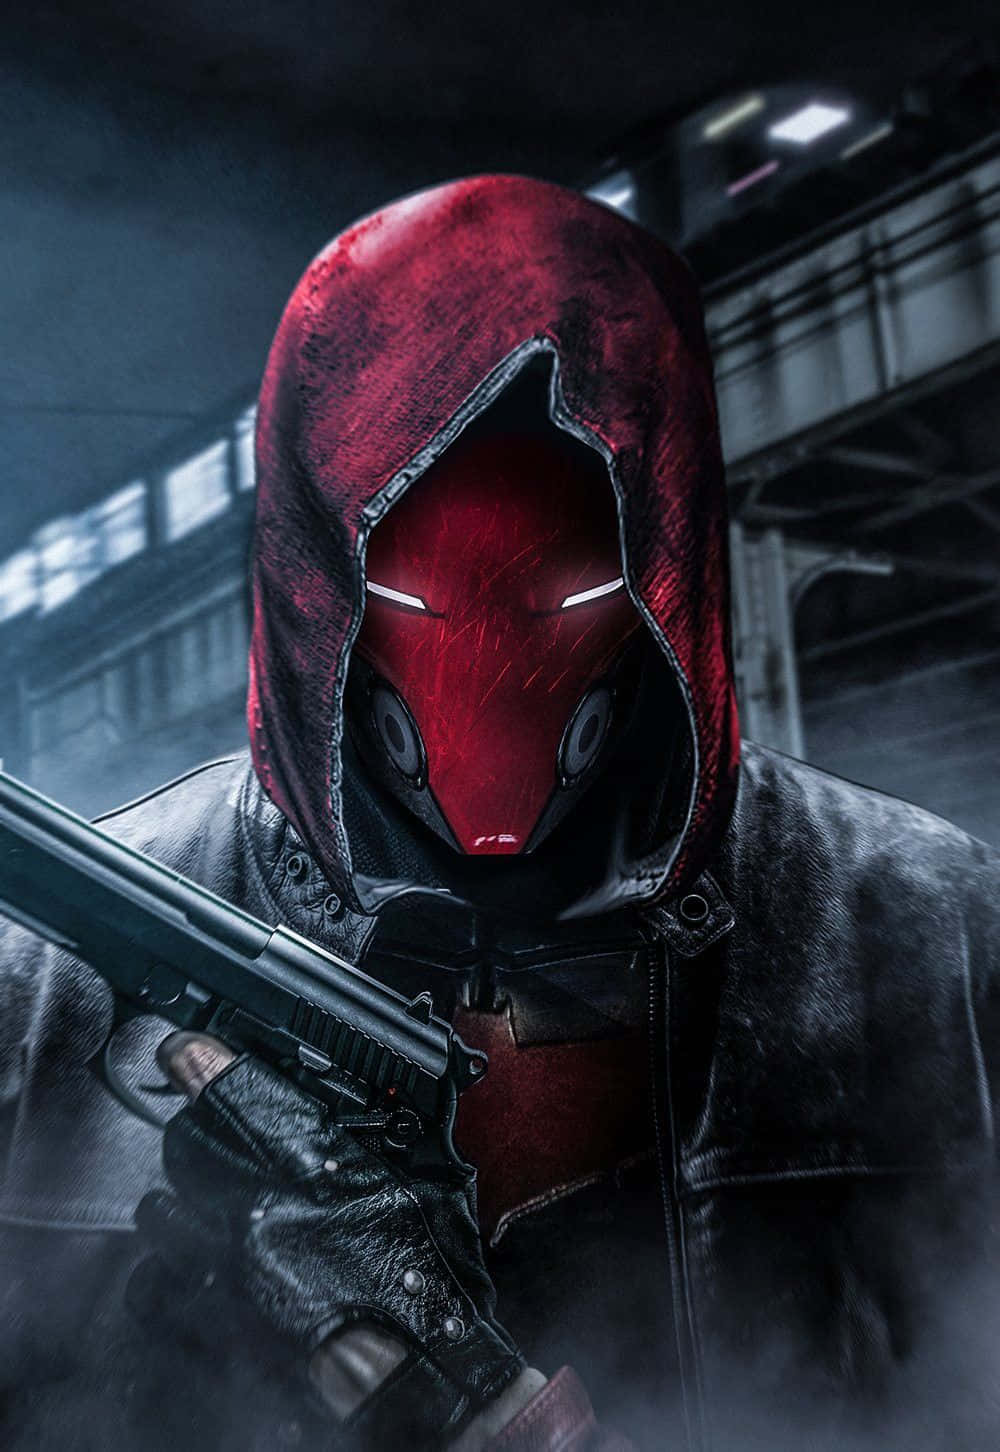 Donning the Red Hood, a vigilante takes on the night